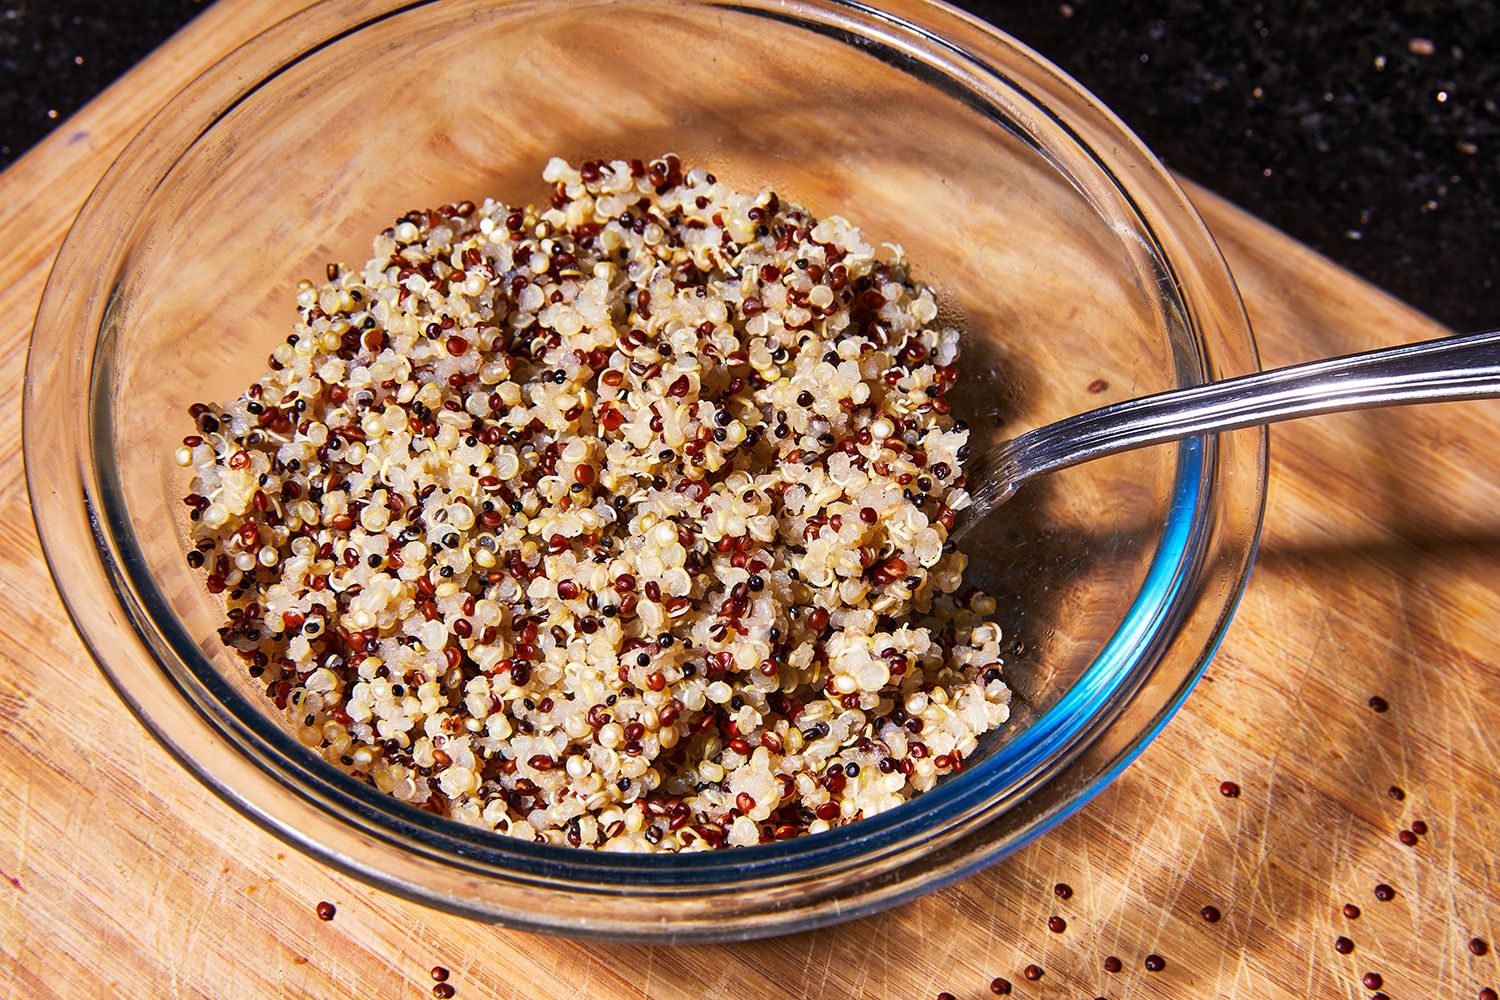 Is Quinoa Good for You? Health Benefits and Nutrition Facts